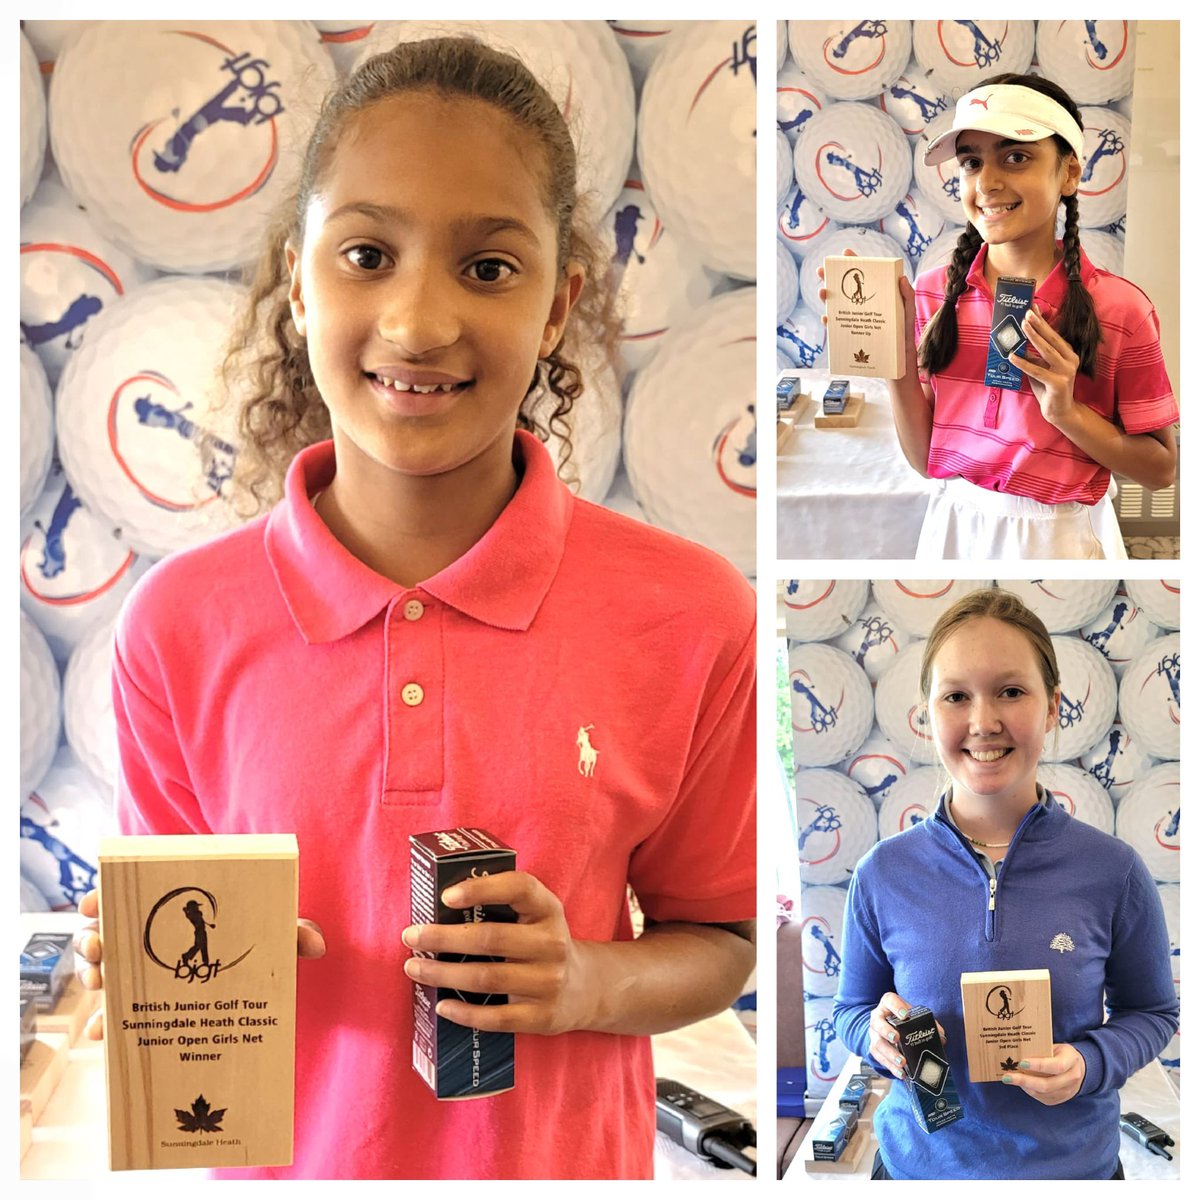 Here are our Junior Open winners from today’s #BJGT Classic event at @sunningdaleheathgc - congratulations, boys and girls! 👏👏👏Well done to all who played & thanks so much to the venue for being fantastic hosts yet again & for all the help on the day! 🙏 See you again in Sept!